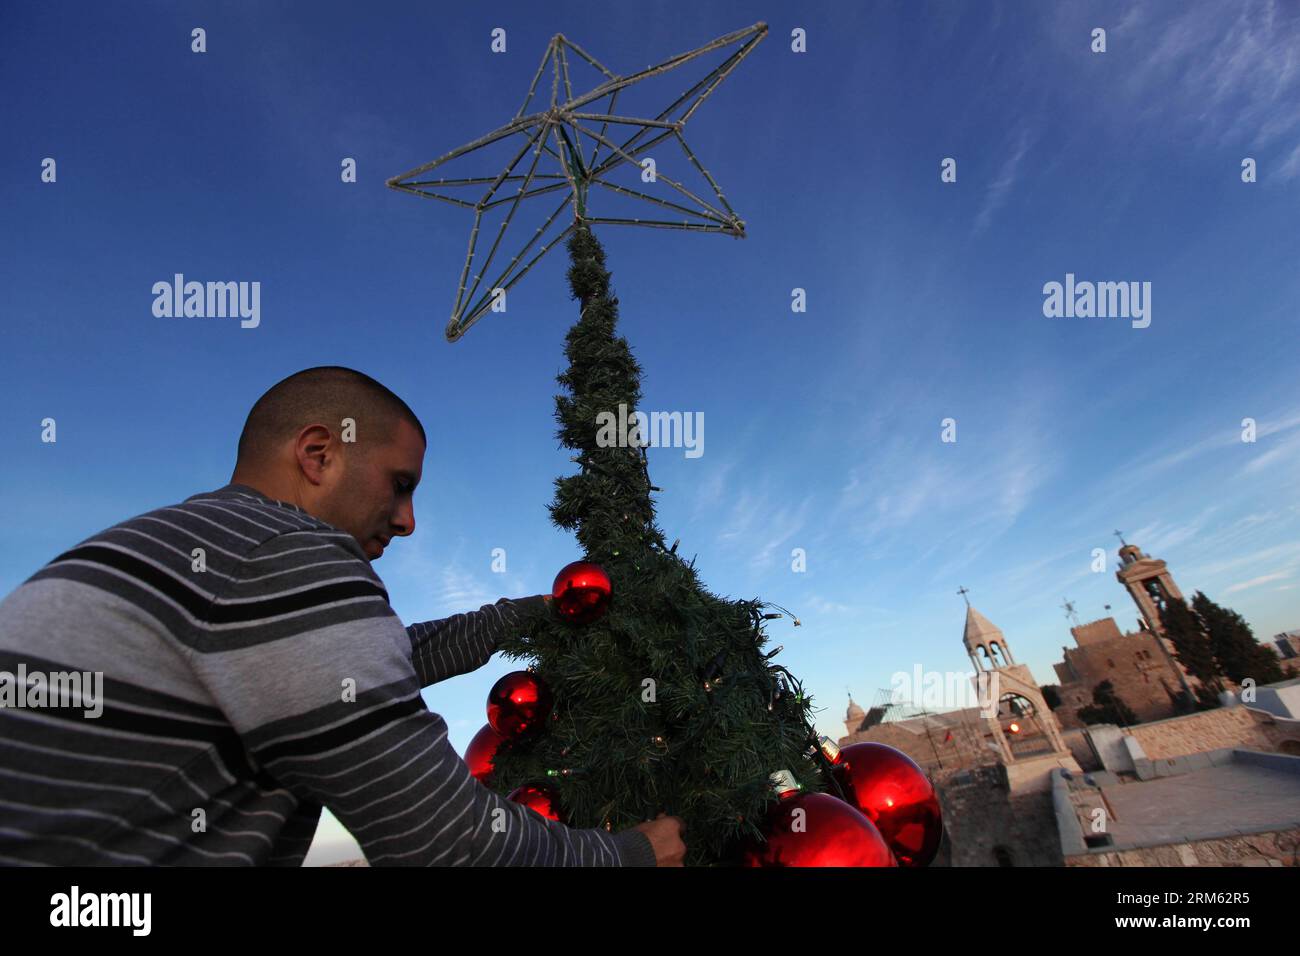 Bildnummer: 60775424  Datum: 30.11.2013  Copyright: imago/Xinhua     A worker puts final touches on a huge Christmas tree erected near the Church of the Nativity in the West Bank city of Bethlehem on Nov. 30, 2013. (Xinhua/Luay Sababa) MIDEAST-BETHLEHEM-CHRISTMAS TREE PUBLICATIONxNOTxINxCHN xcb x0x 2013 quer Stock Photo